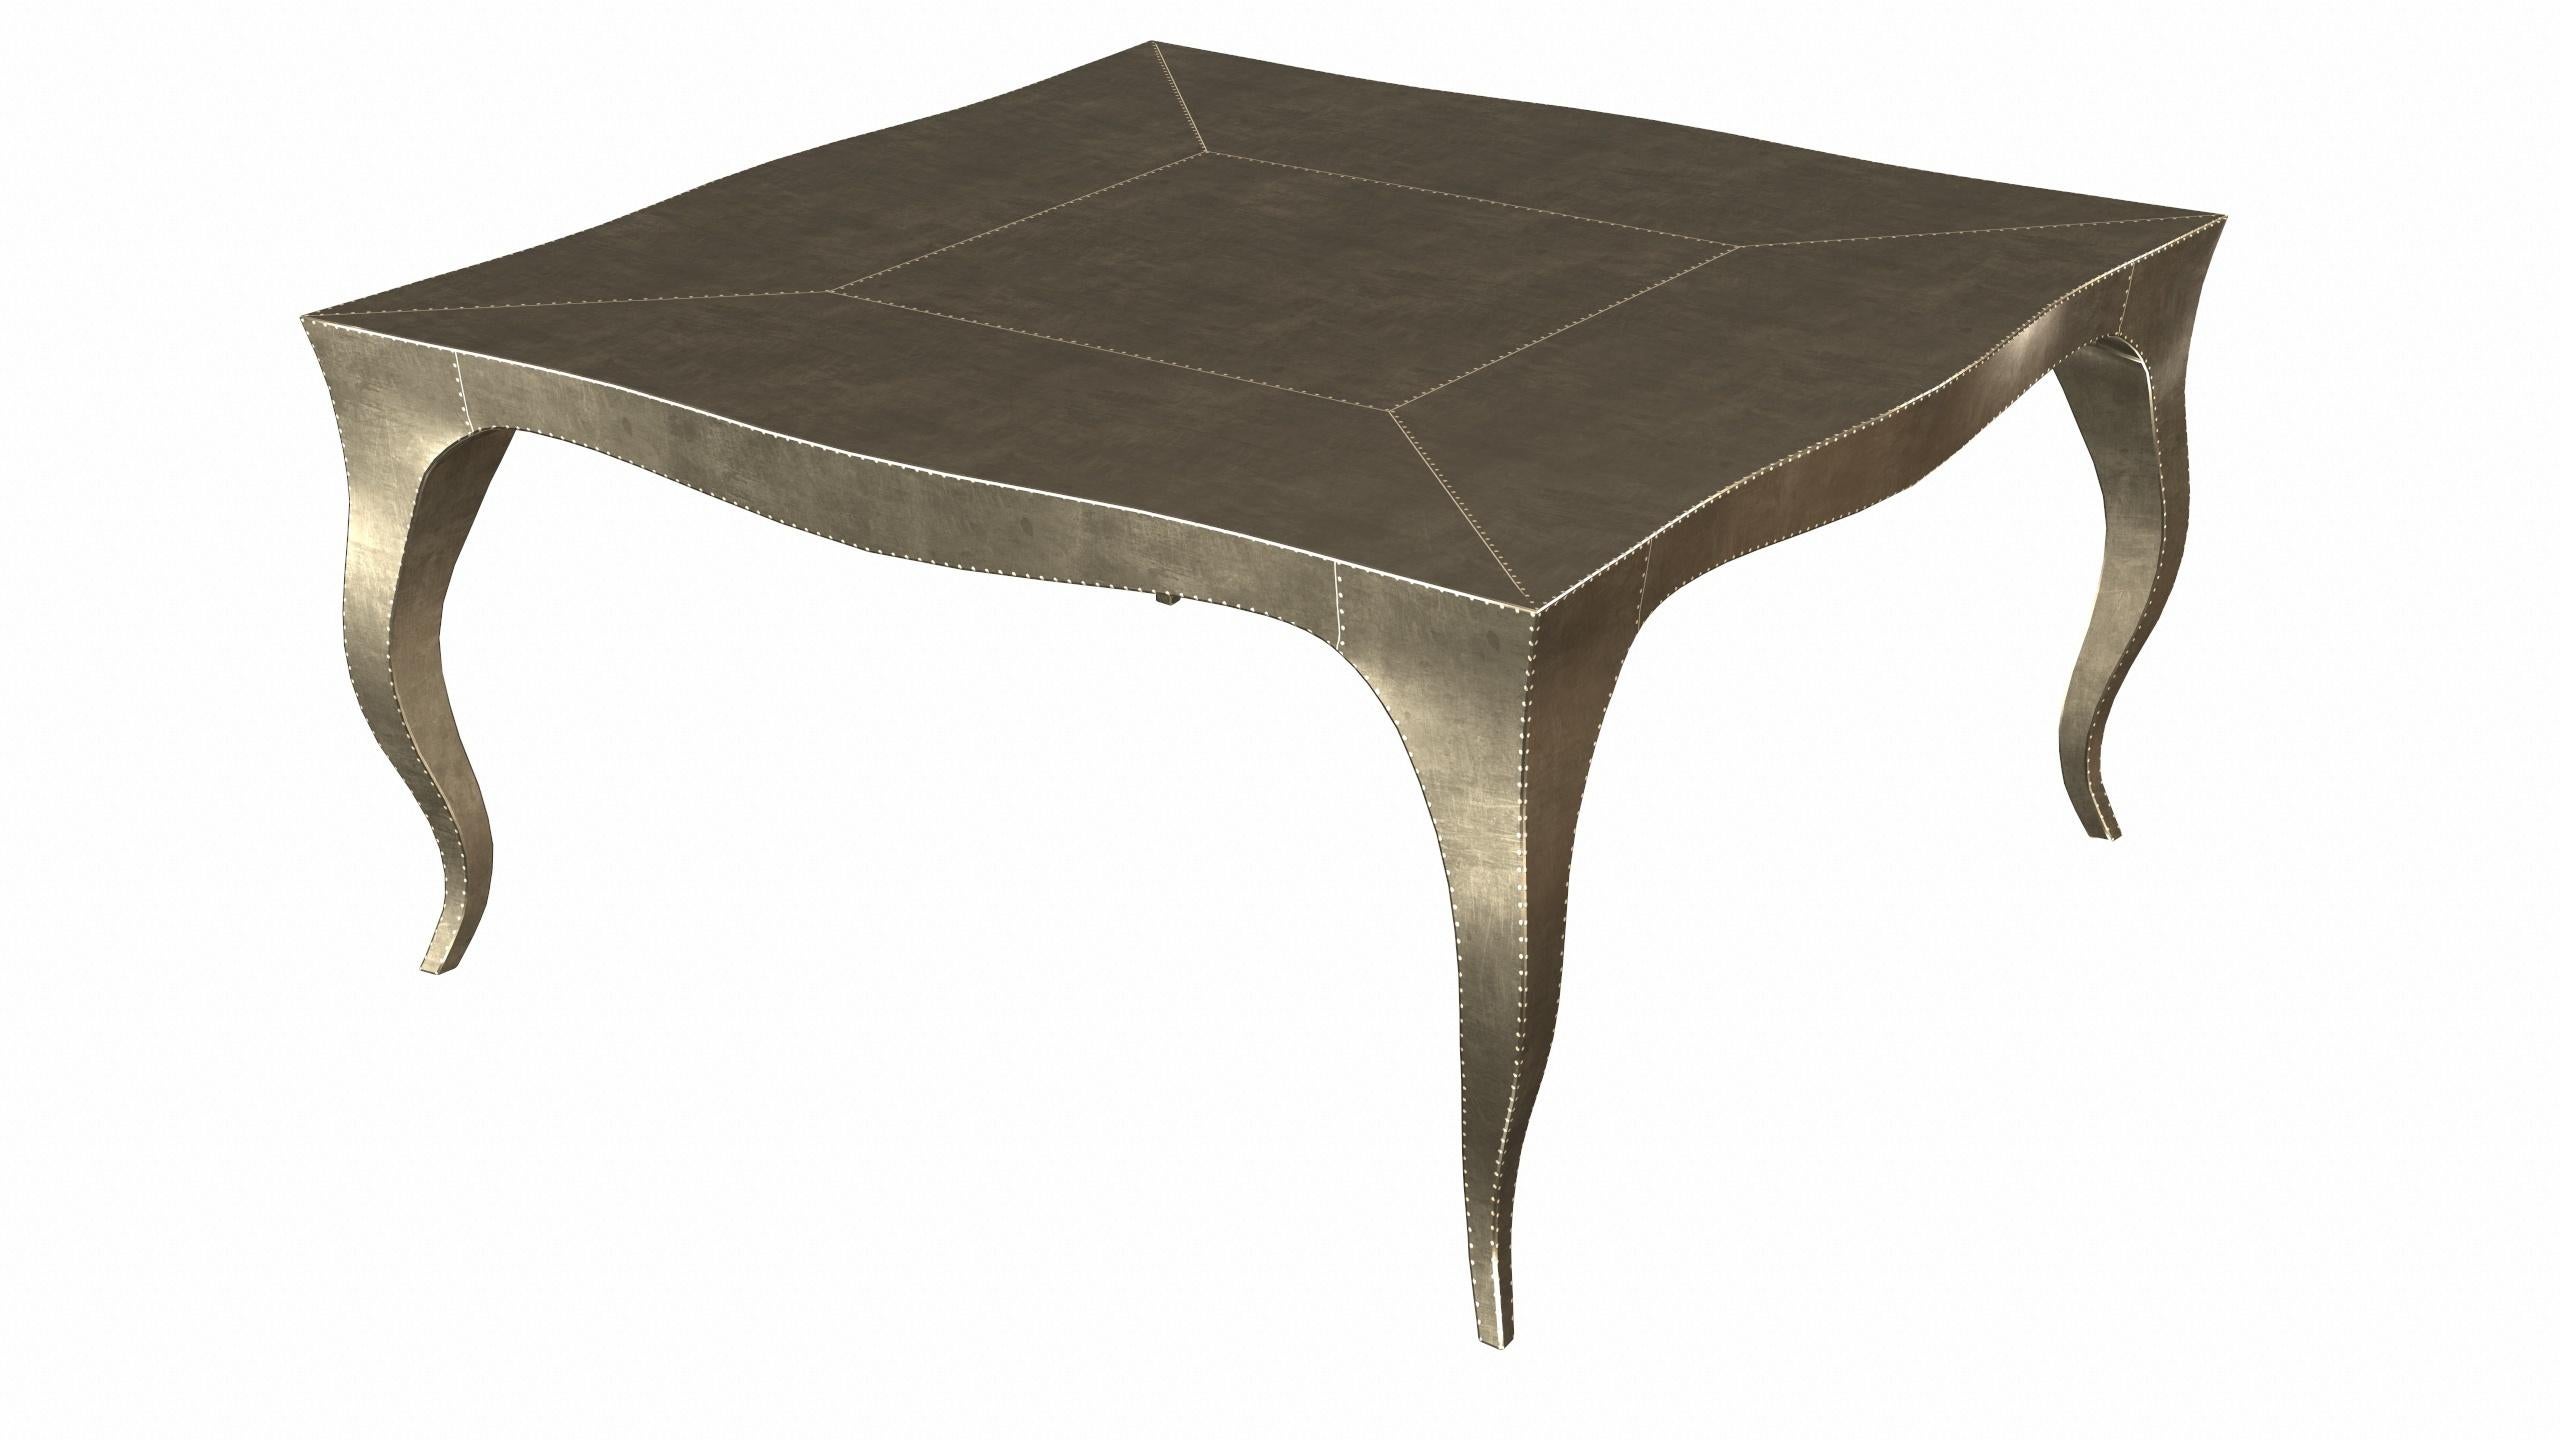 Louise Art Deco Nesting Tables Smooth Brass 18.5x18.5x10 inch by Paul M. en vente 2